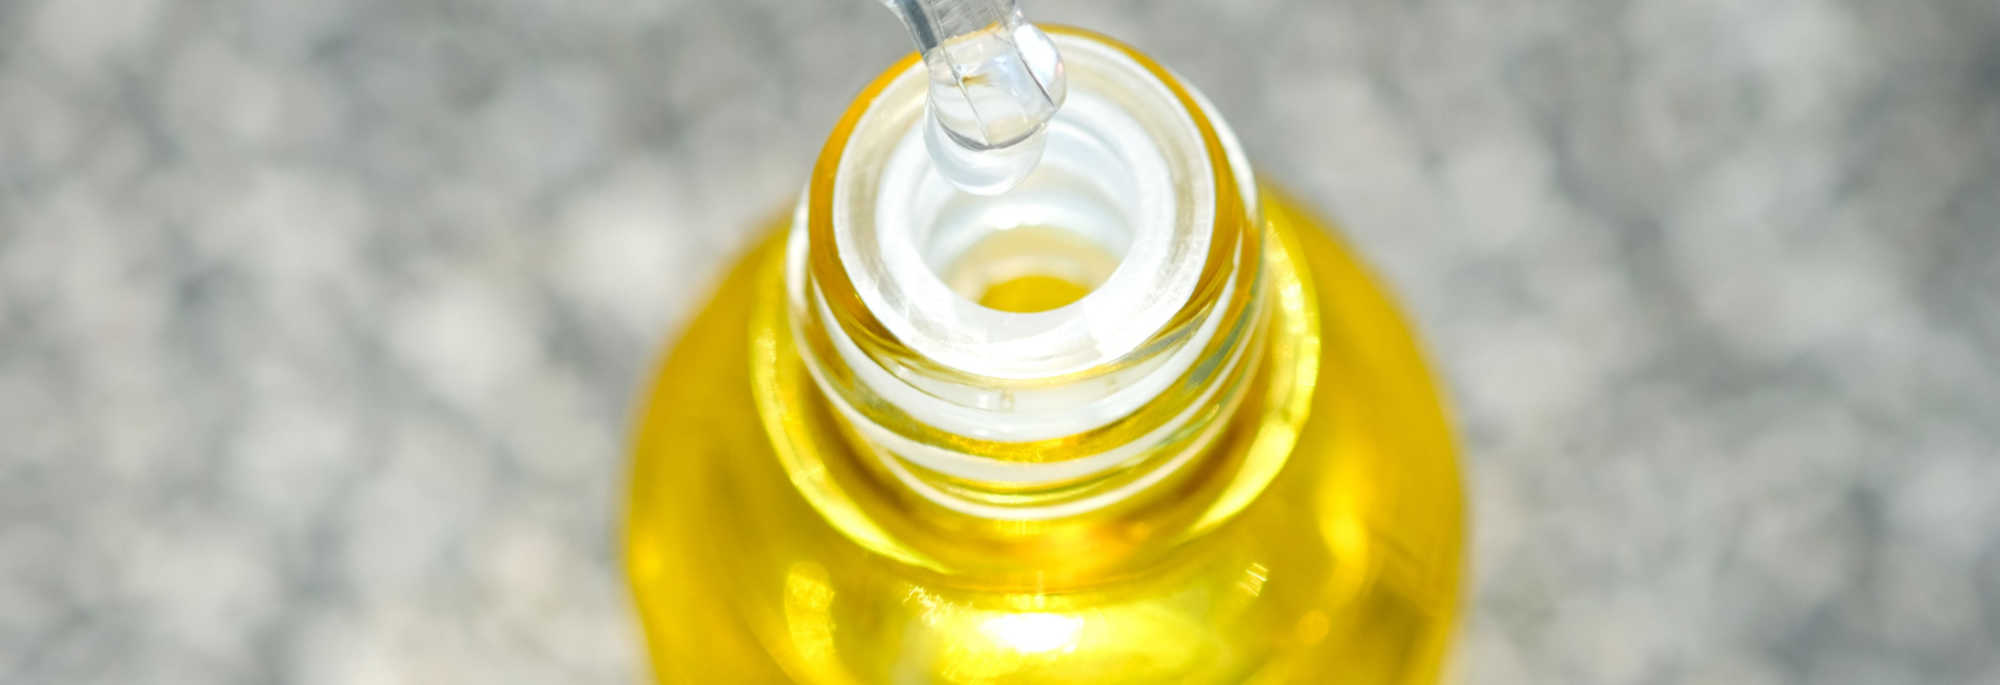 image of mineral oil